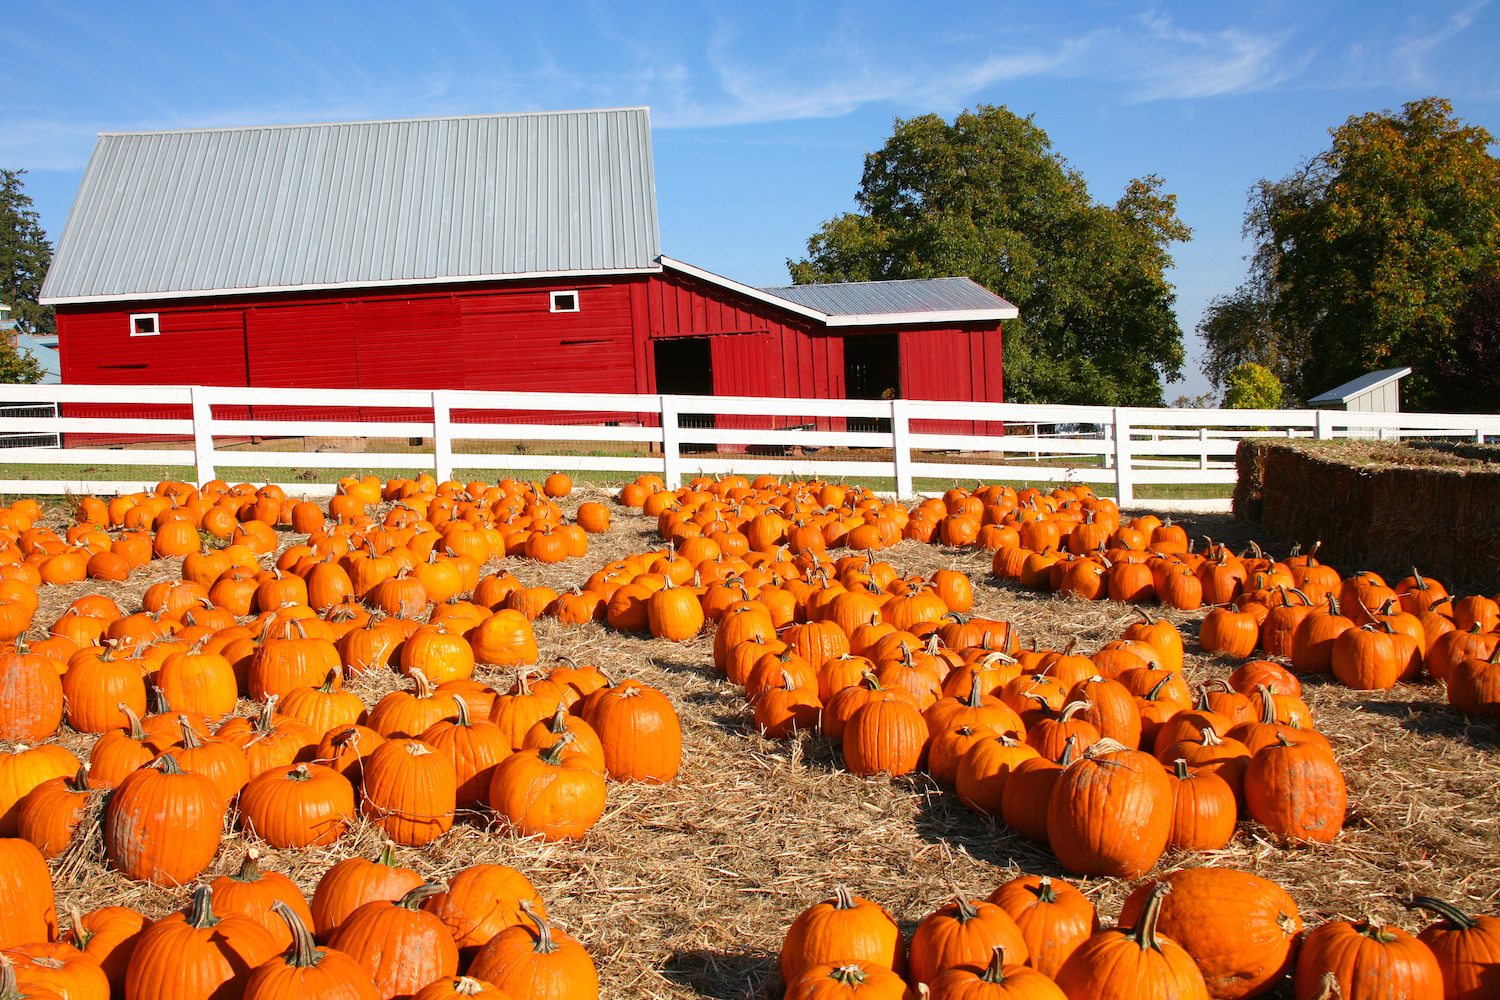 Largest Pumpkin Patches in the U.S.